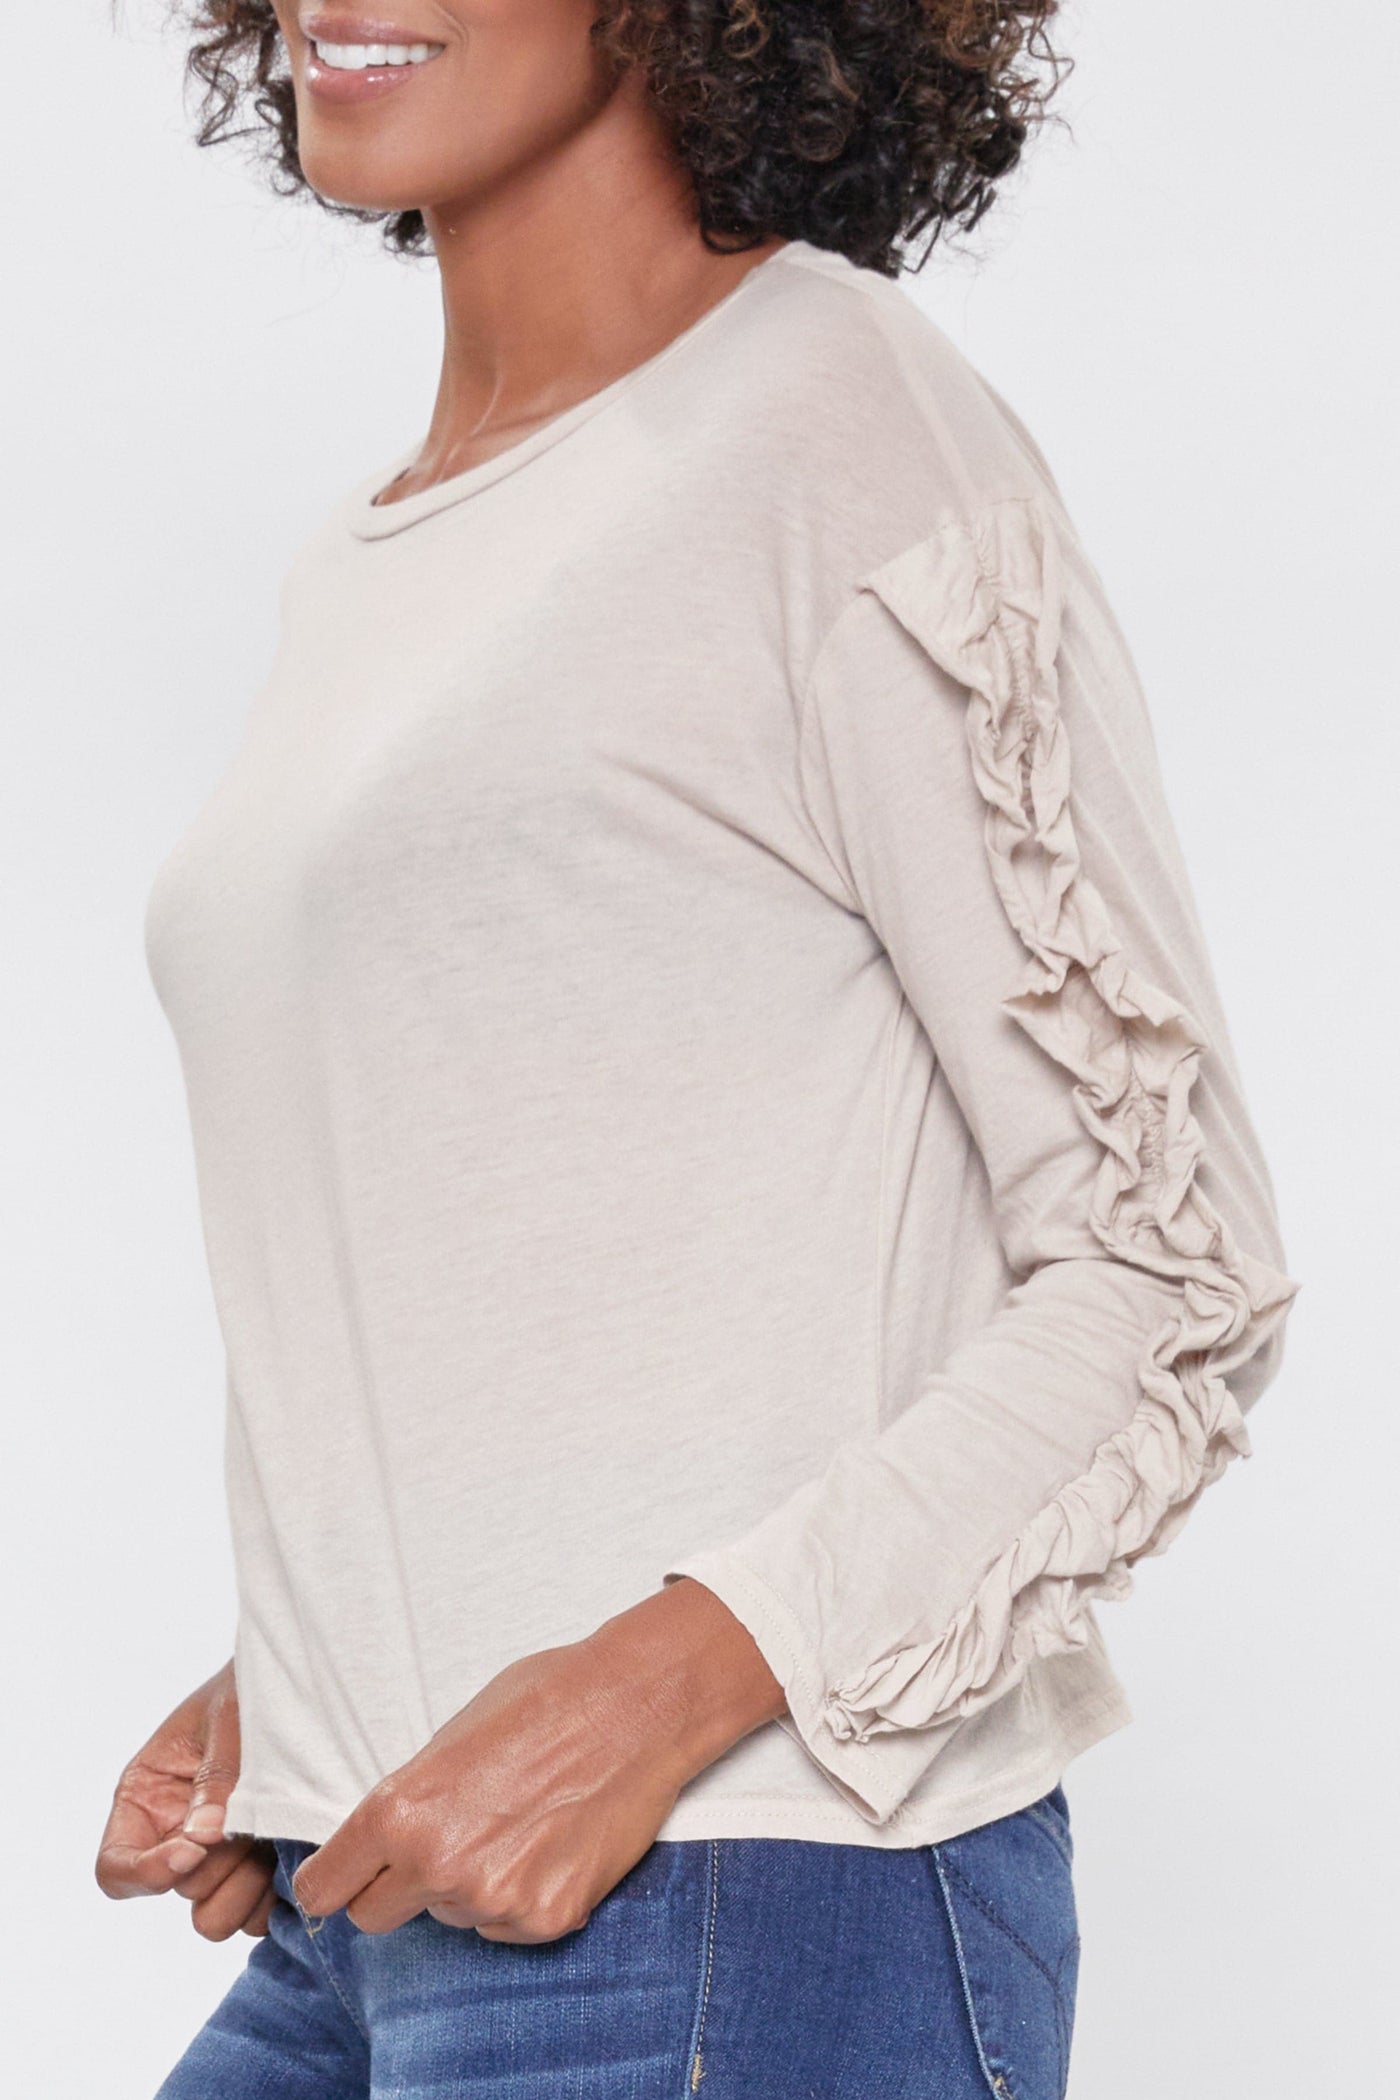 Women's Long Sleeve Top With Ruffled Sleeves Deal